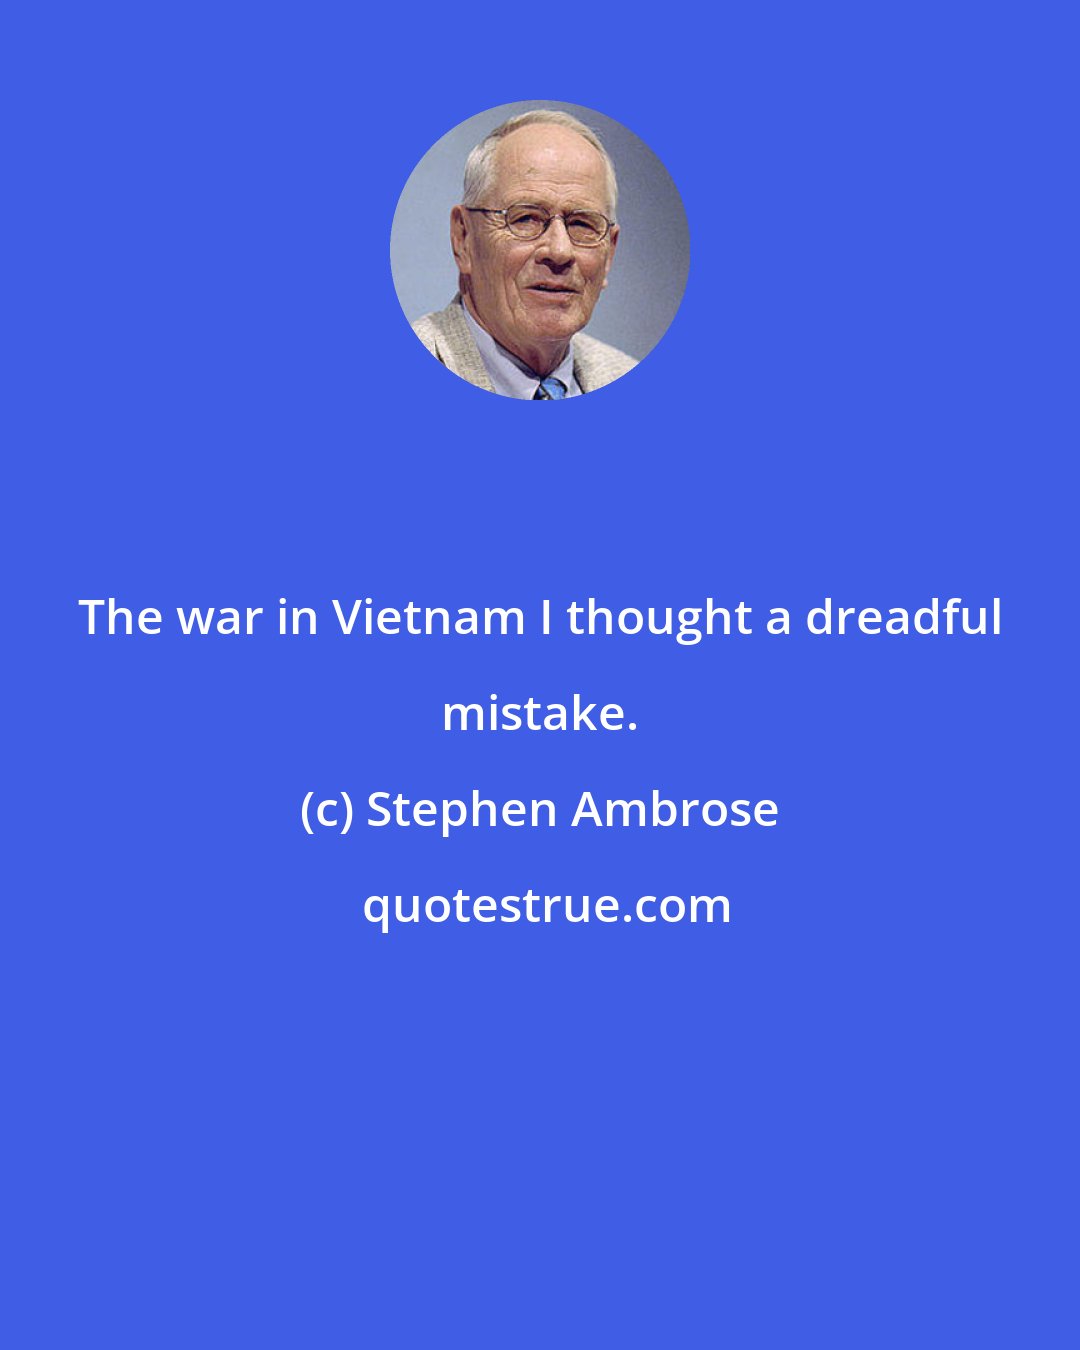 Stephen Ambrose: The war in Vietnam I thought a dreadful mistake.